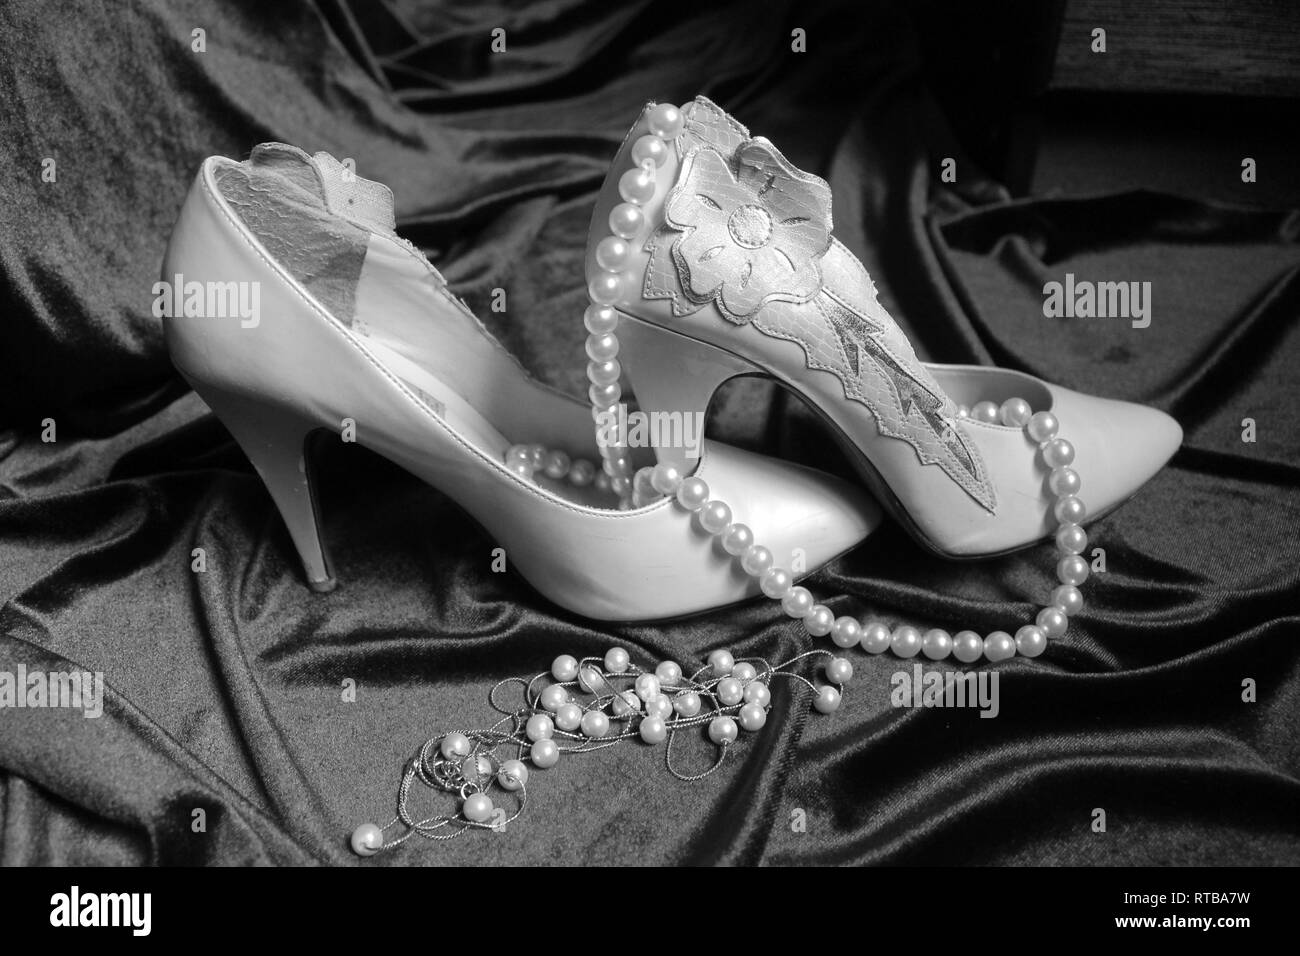 white shoes on heels with pearl jewelry accessories for braid Stock Photo